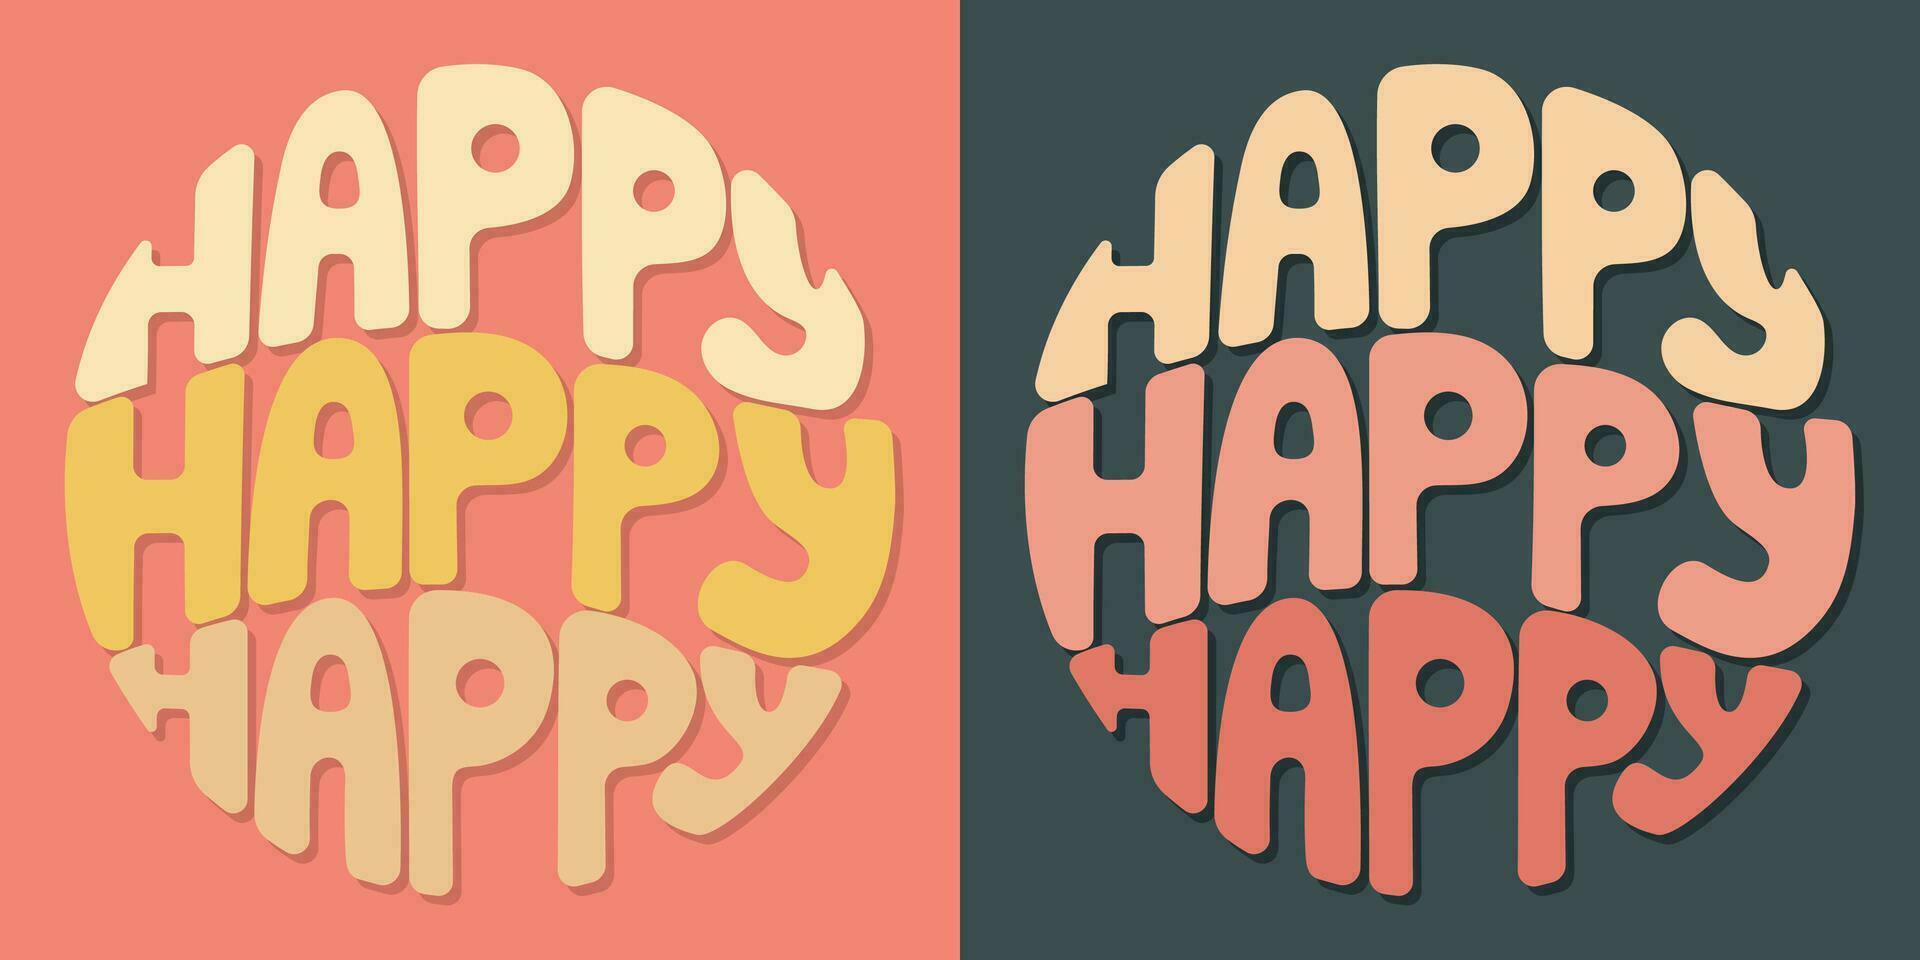 Handwritten inscription happy happy happy in the form of a circle. Colorful cartoon vector design. Illustration for any purpose. Positive motivational or inspirational quote. Groovy vintage lettering.